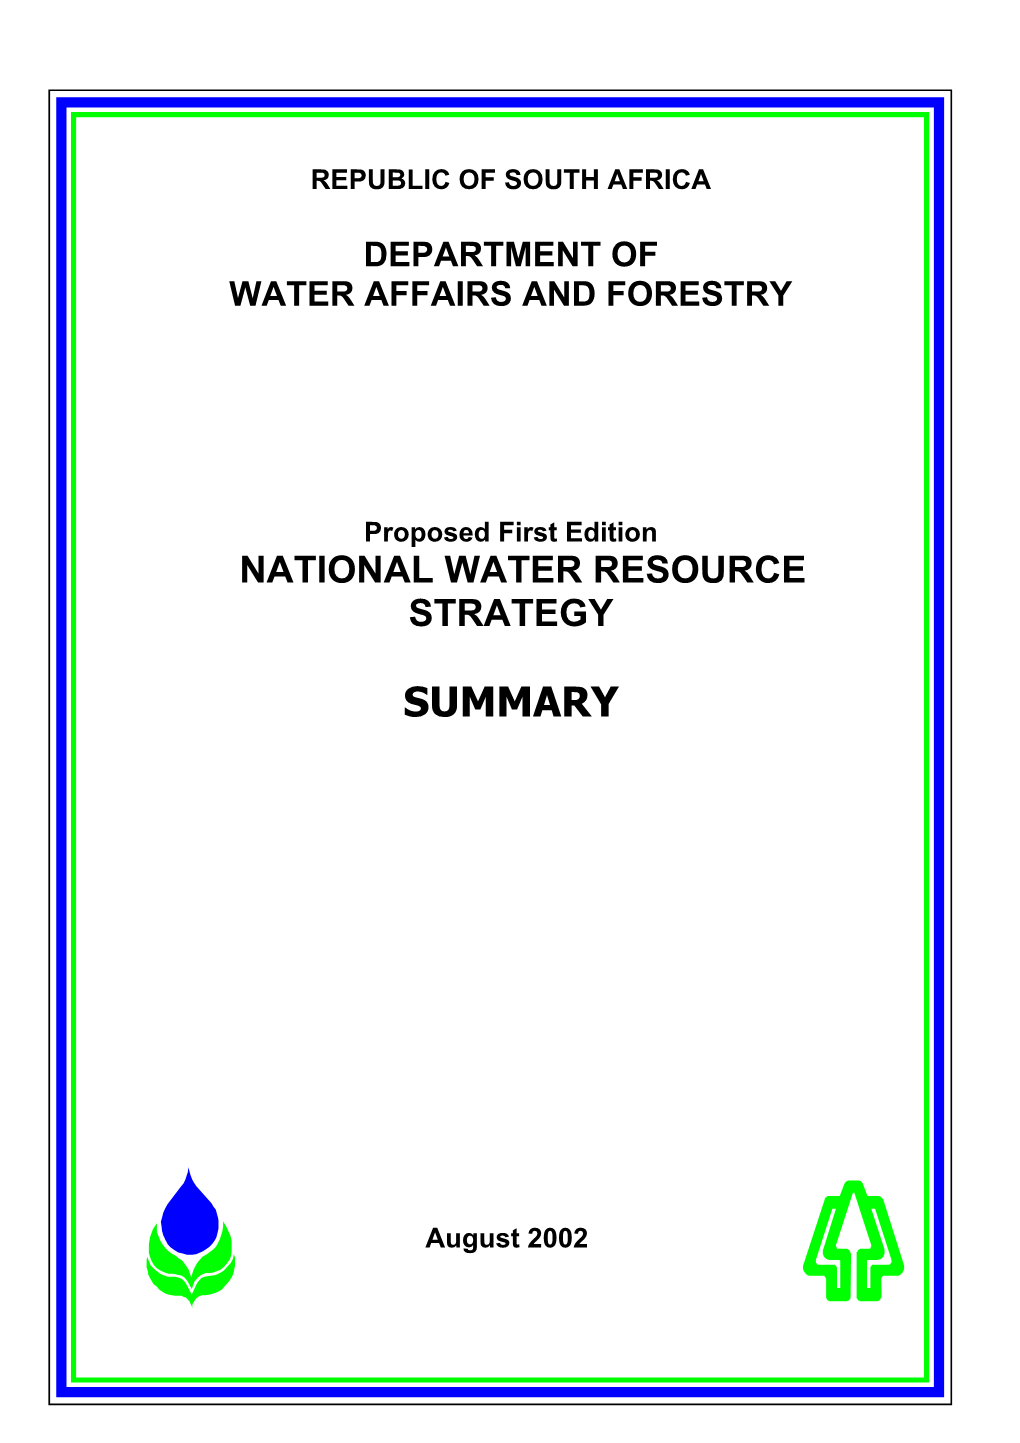 Summary Proposed First Edition National Water Resource Strategy July 2002